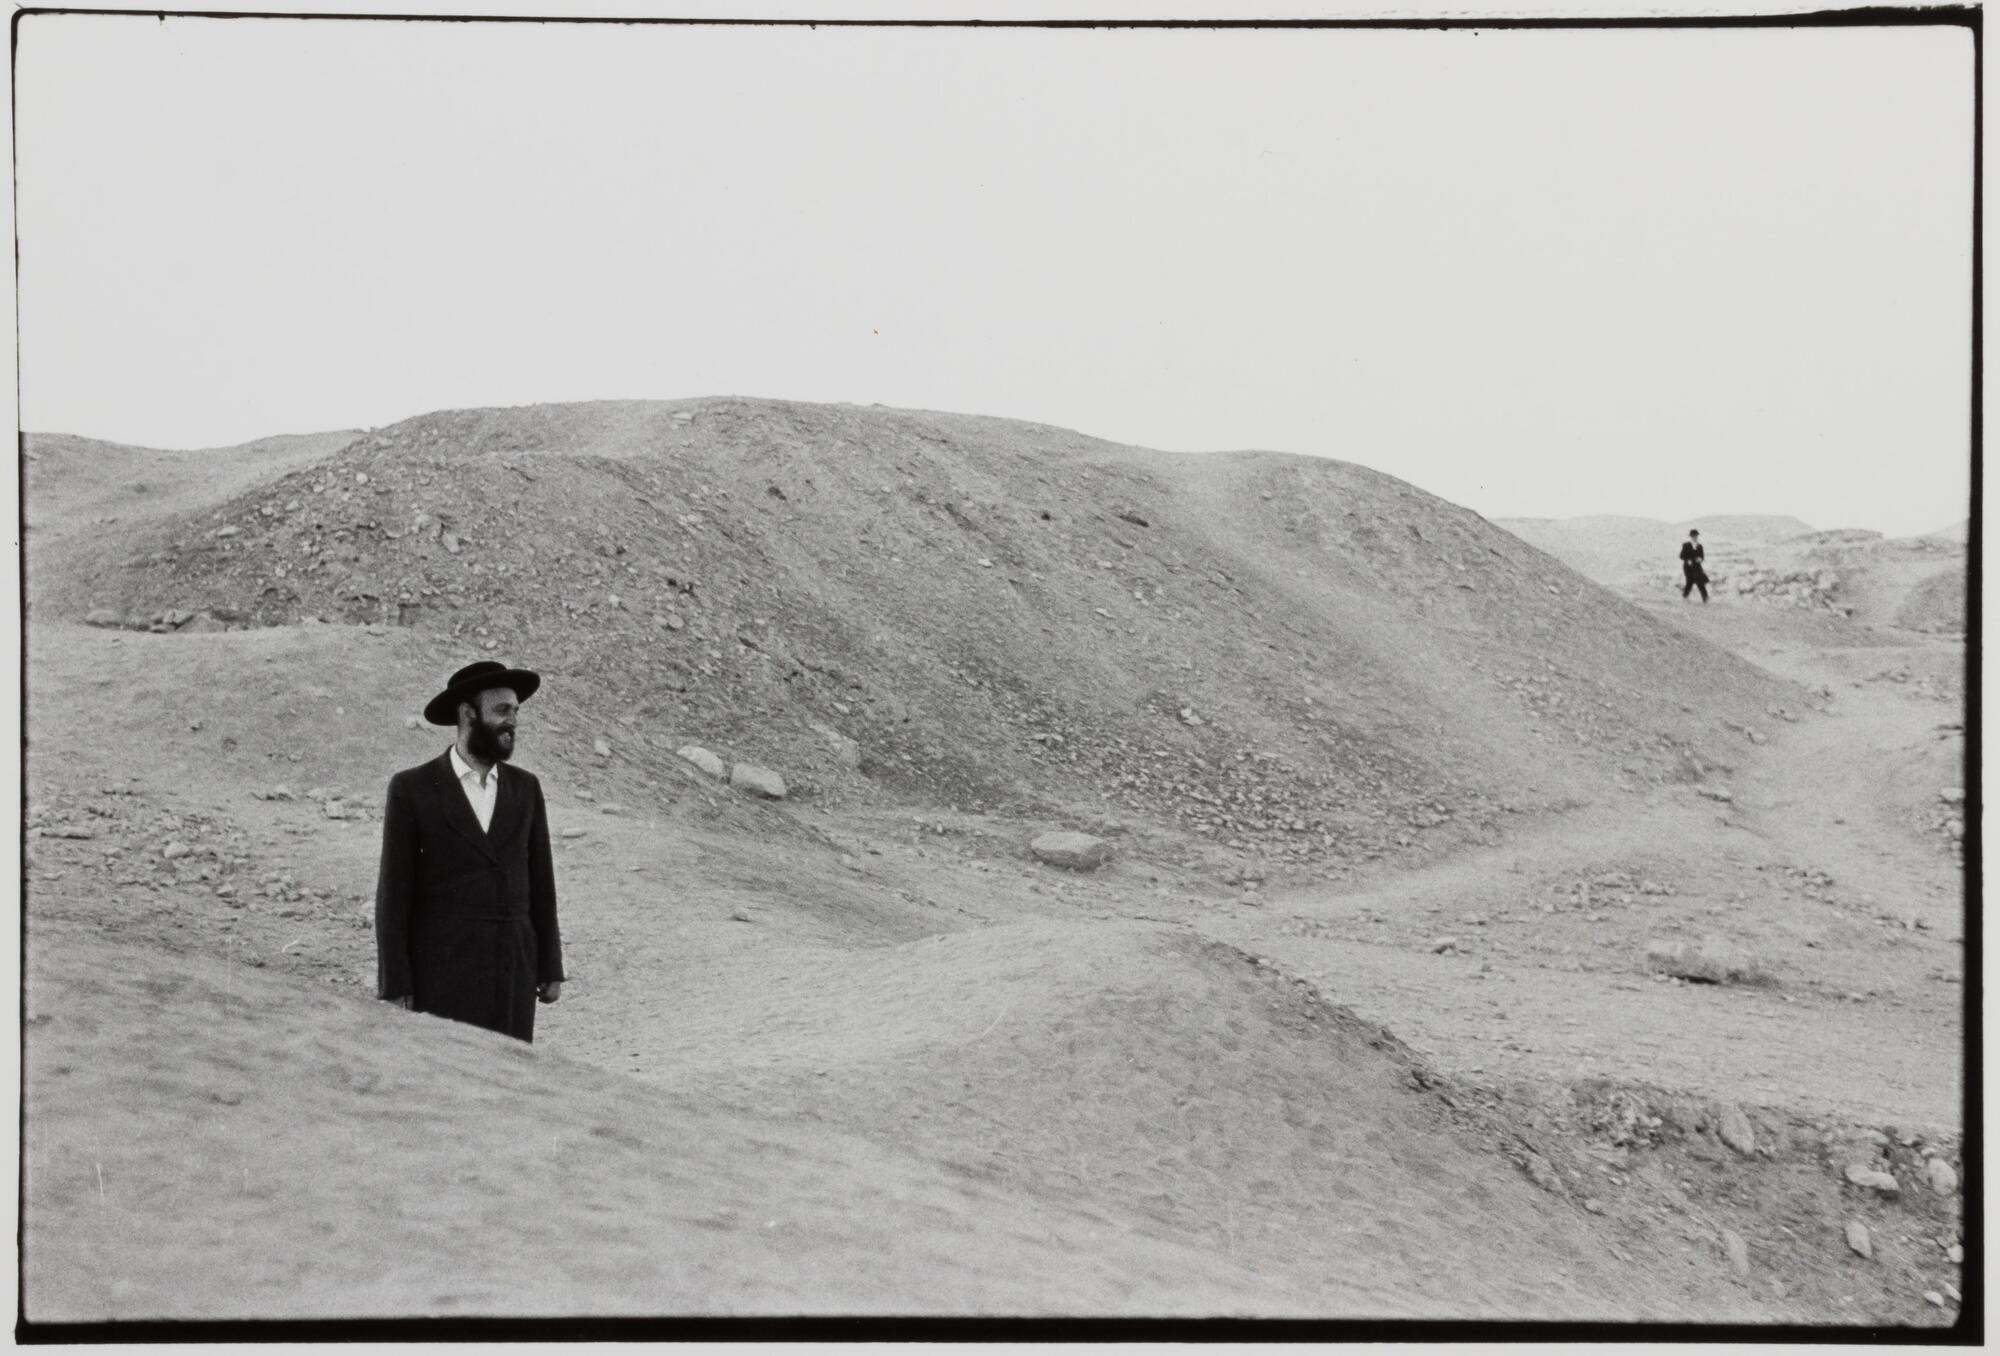 A man in hassidic clothing standing in the middle of a sand pile. There is another man farther back in the distance.